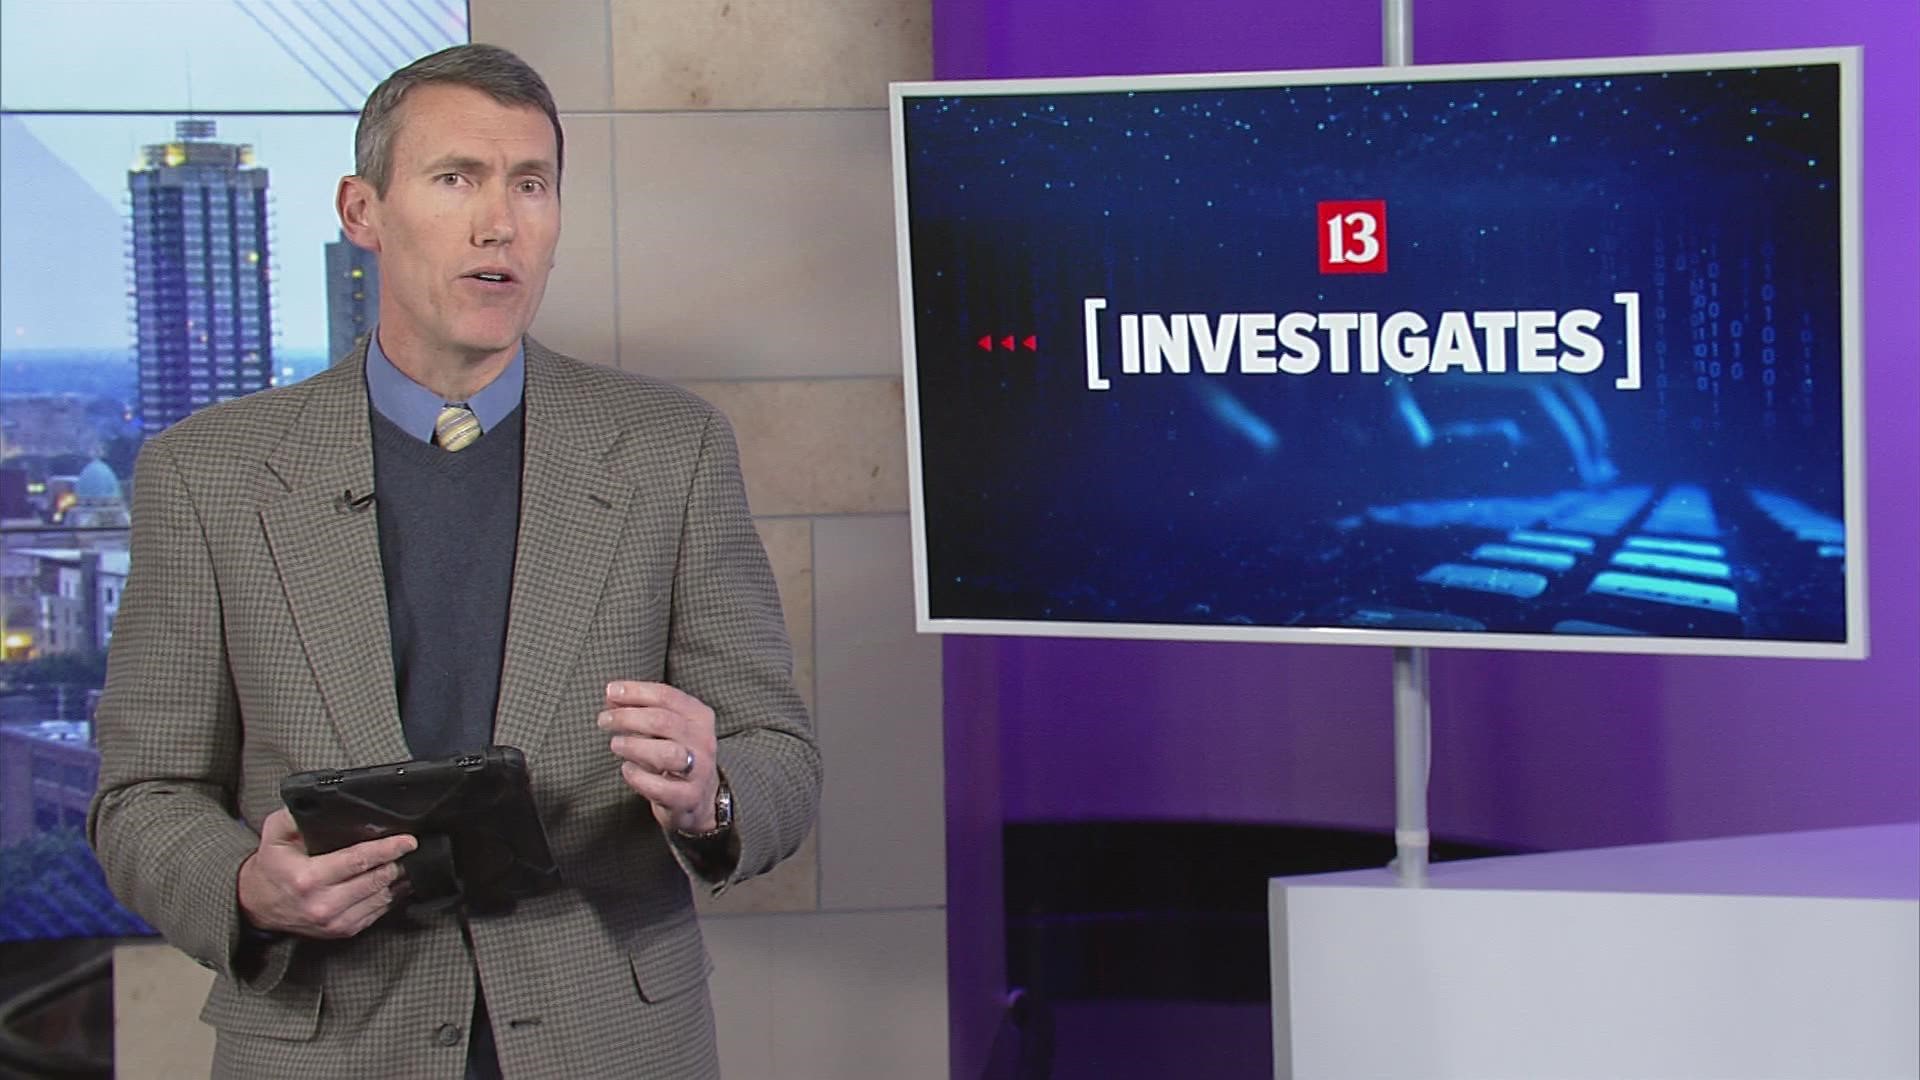 13 Investigates has learned more about the connection of the Delphi murders to the "Anthony Shots" fake social media profile.